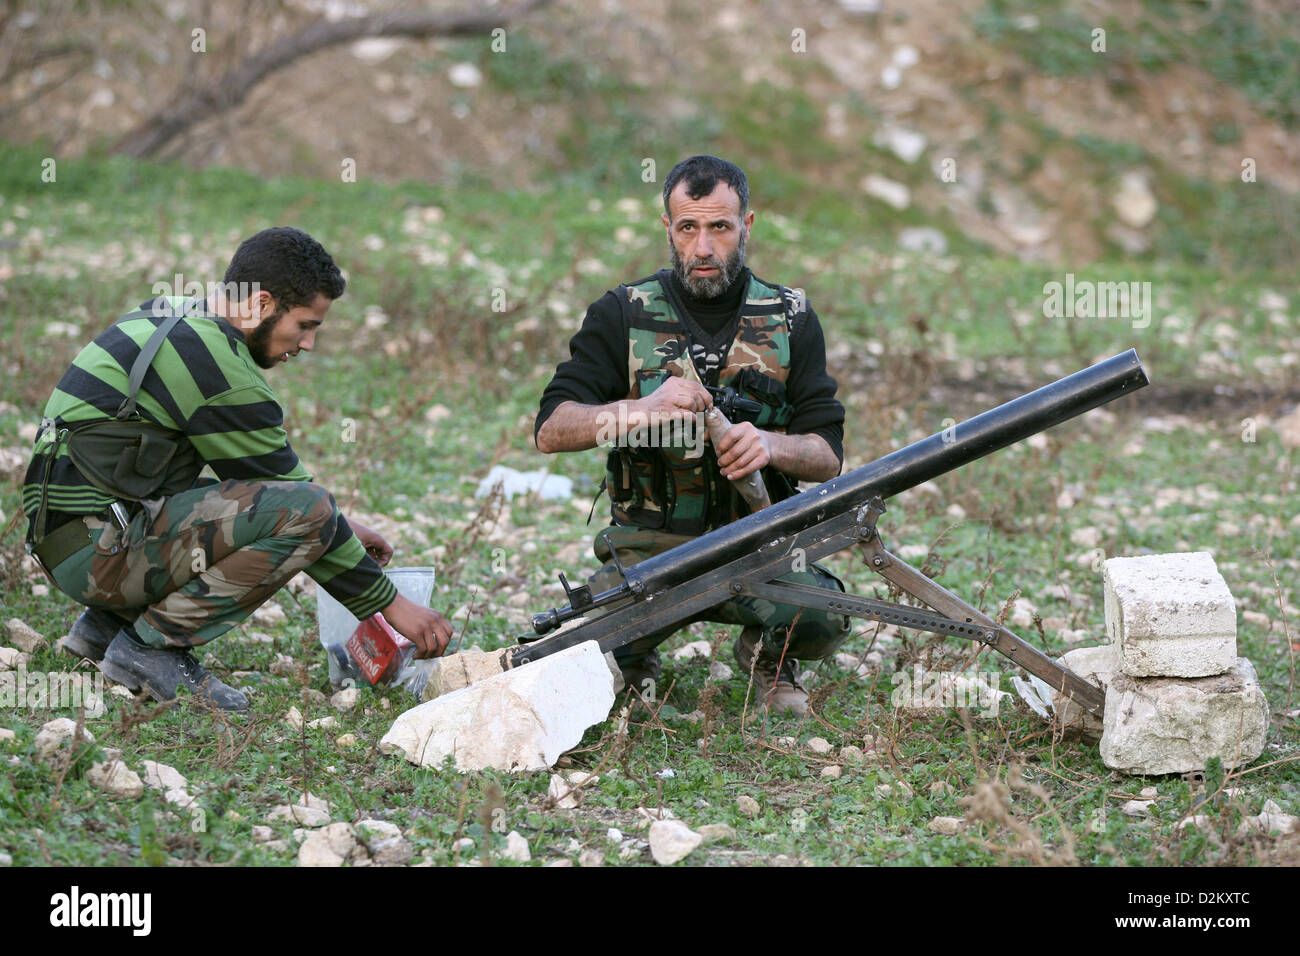 Aleppo, Syria. 27th January 2013. Members of the Free Syrian Army (FSA) prepare to launch a self-build mortar shell after taking control of the area and trying to defence against a counter-attack in a southern area of Aleppo, Syria, 27 January 2013. The southern region of Aleppo is of strategic importance, because the last connection between the airport and the west part of the city runs through the area. Both regions are still controlled by Assad's government troops while the rest of the area is under control of the FSA.   Photo: THOMAS RASSLOFF/ Alamy Live News Stock Photo